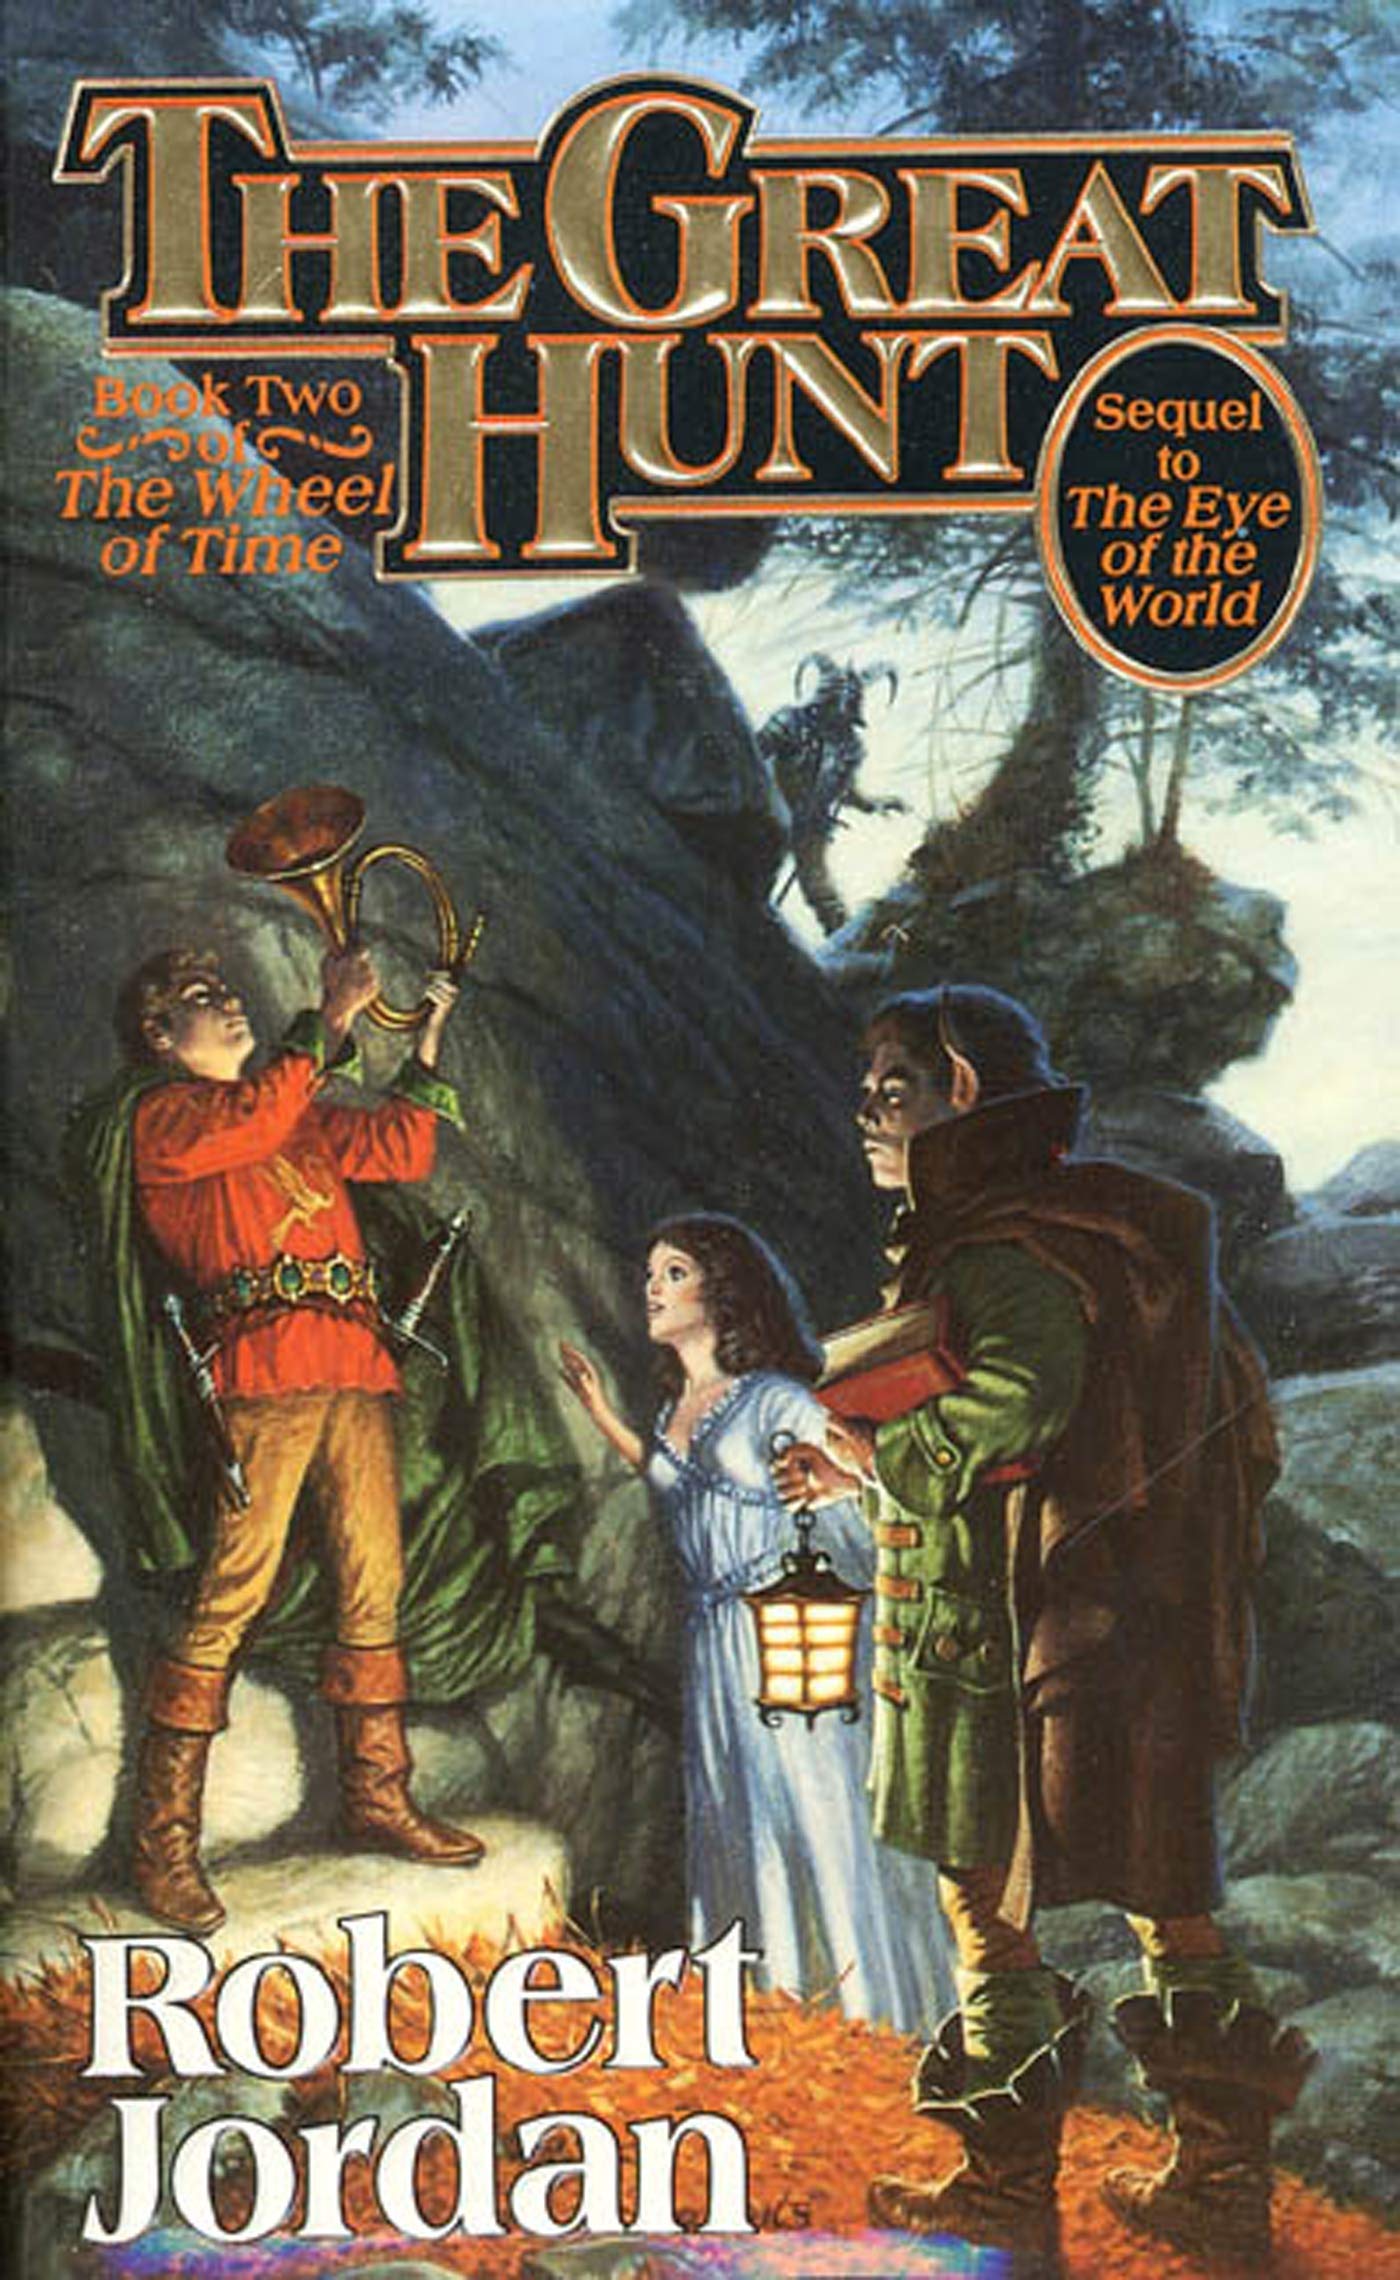 The Great Hunt (The Wheel of Time, #2)